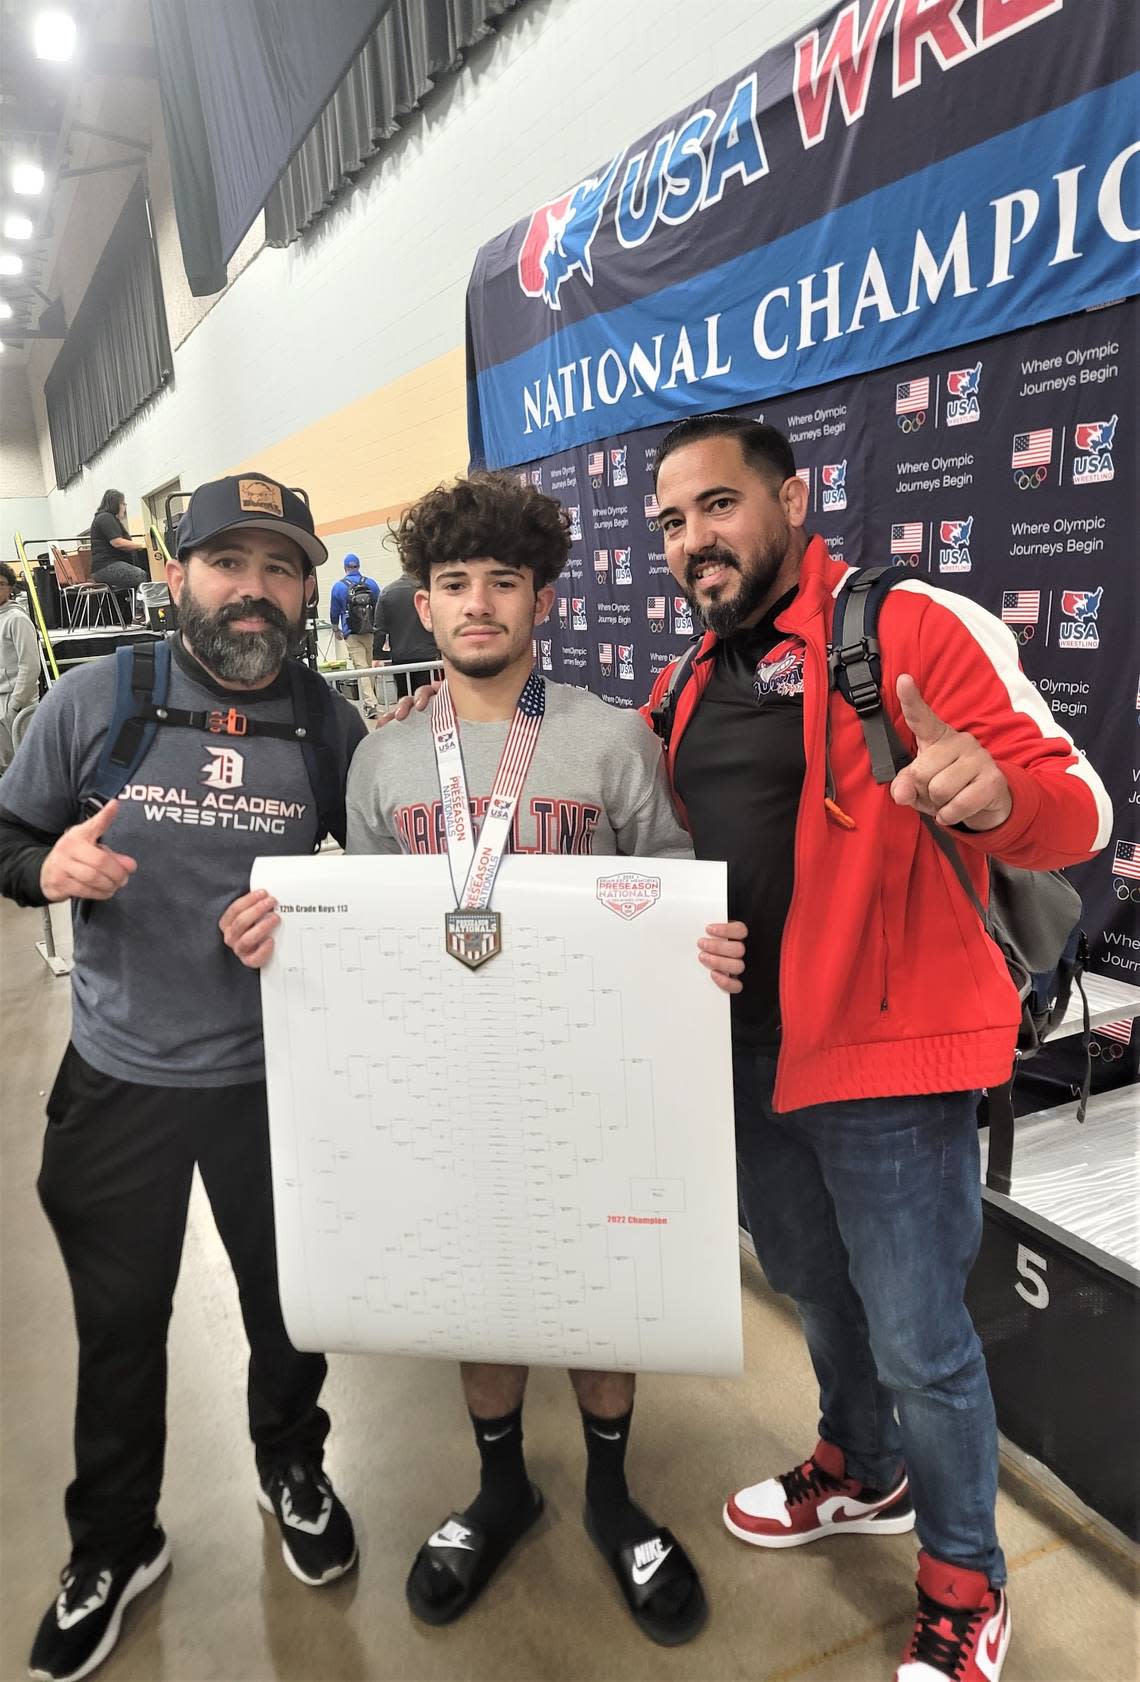 Christian Vazquez (113 pounds) of Doral Academy wrestling takes first at nationals in Des Moines, Iowa. Photo Courtesy Doral Academy Wrestling